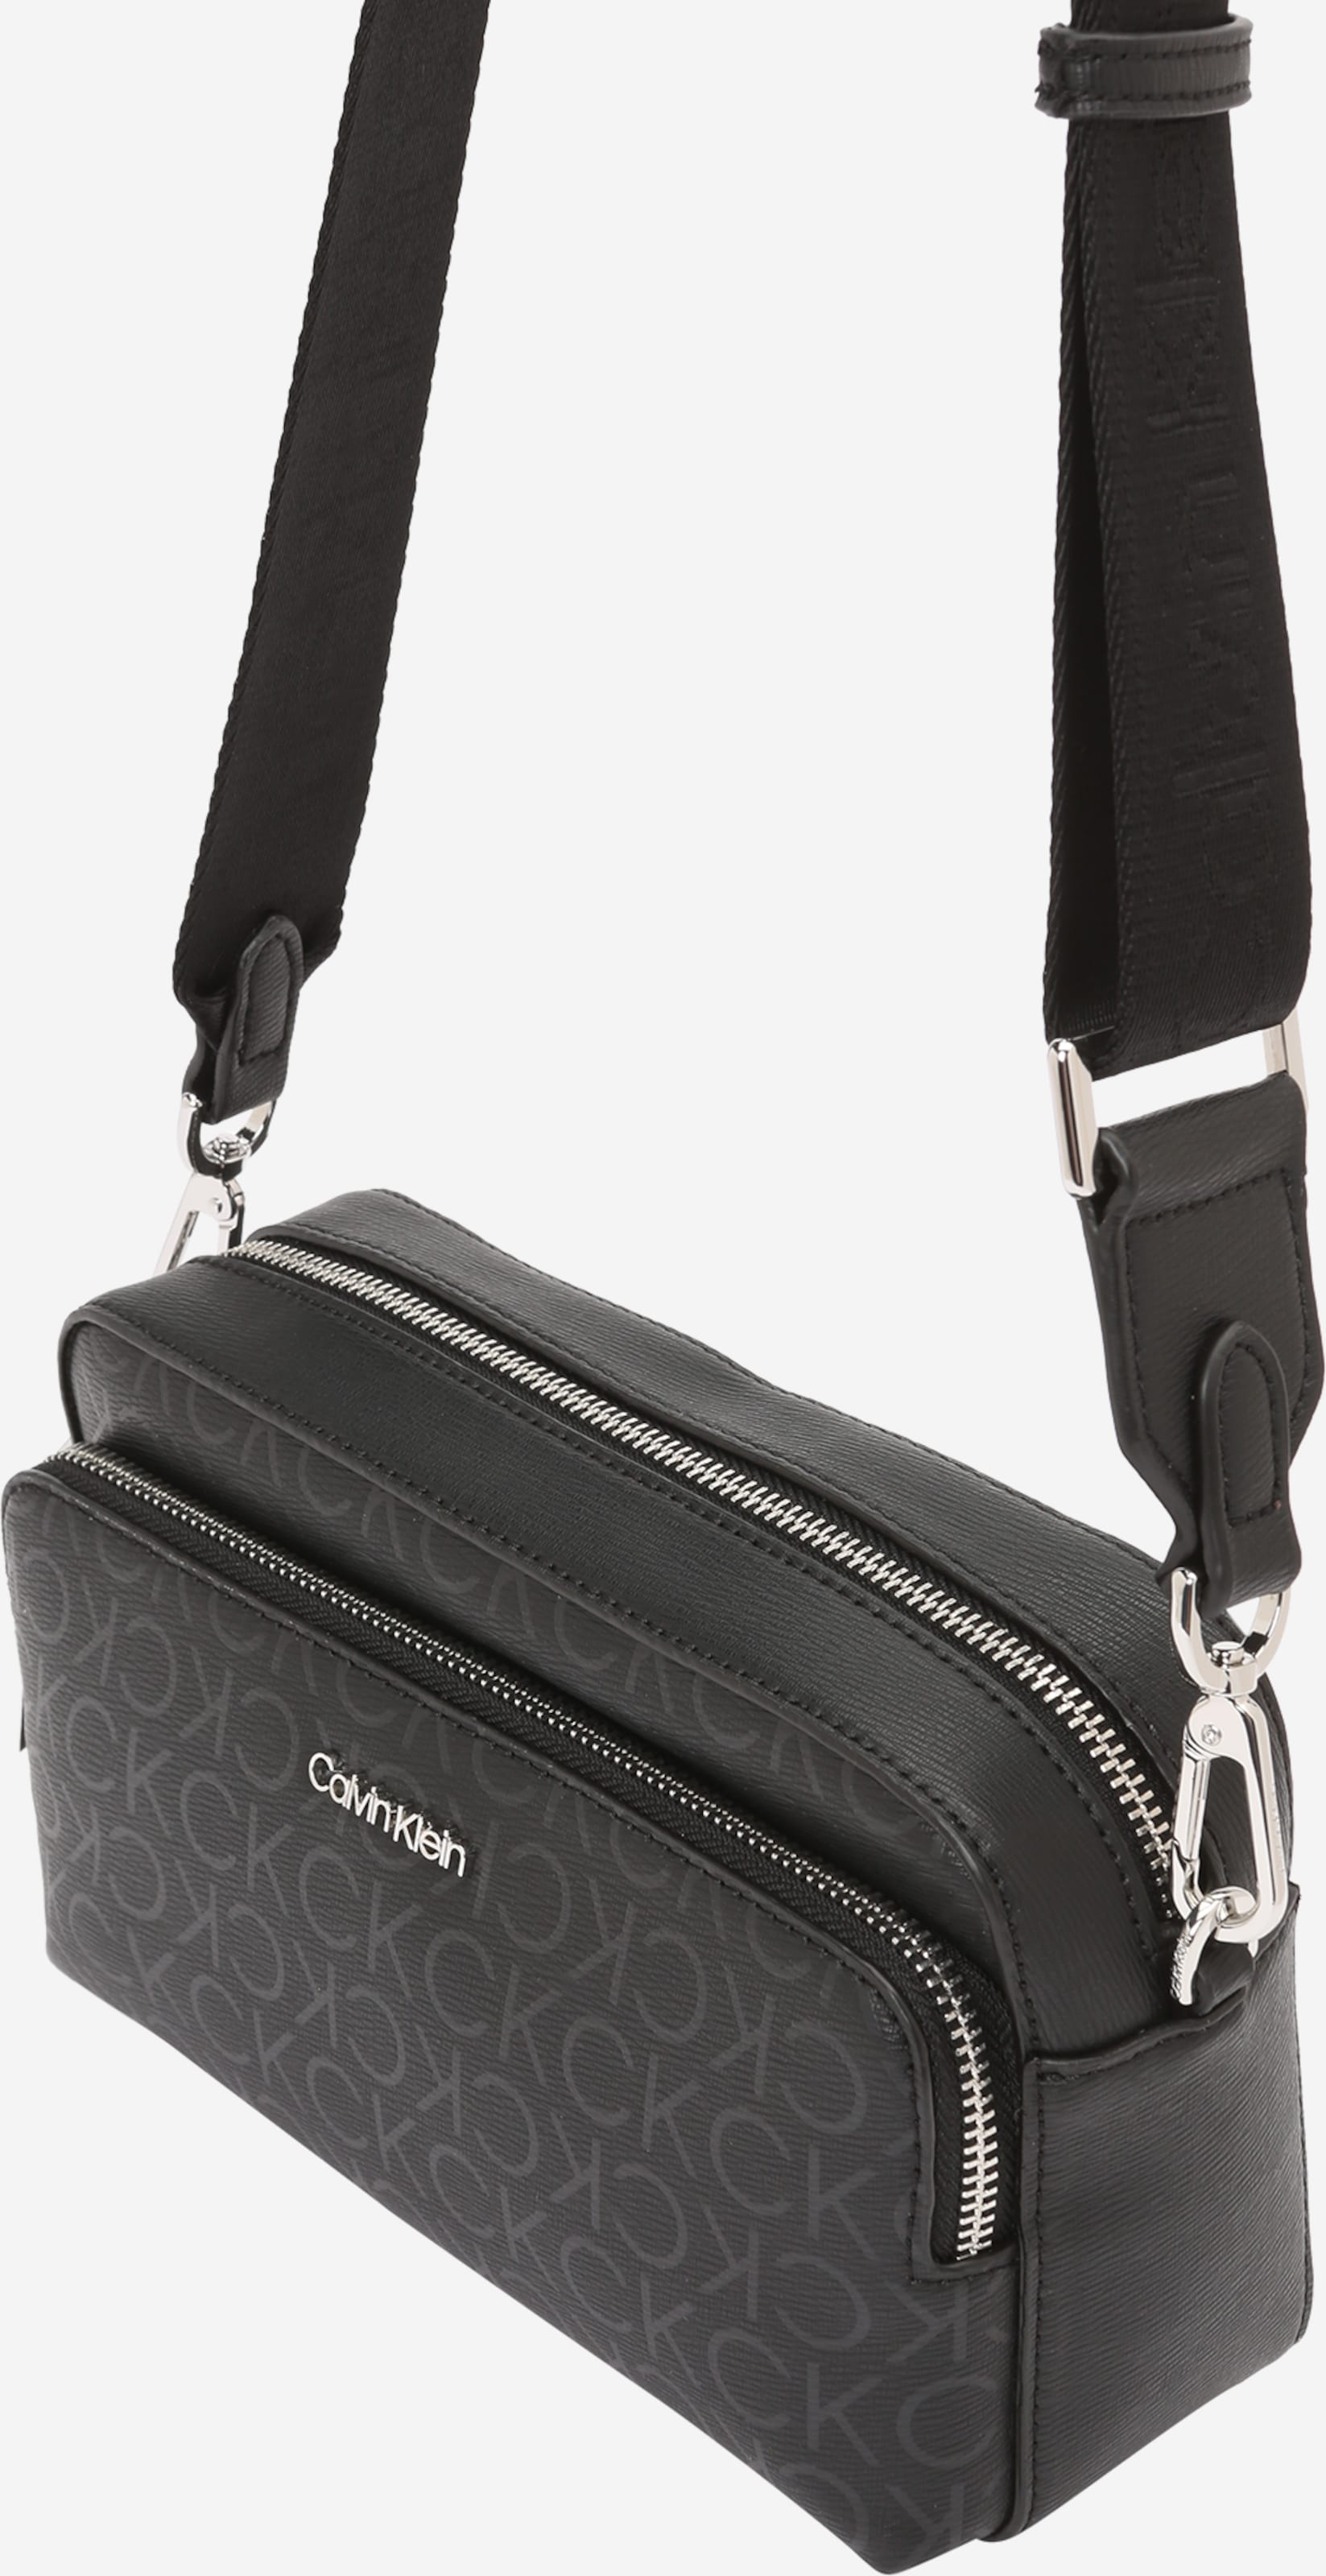 New With Tag CALVIN KLEIN BLACK PHONE Crossbody Bag.100%AUTHENTIC